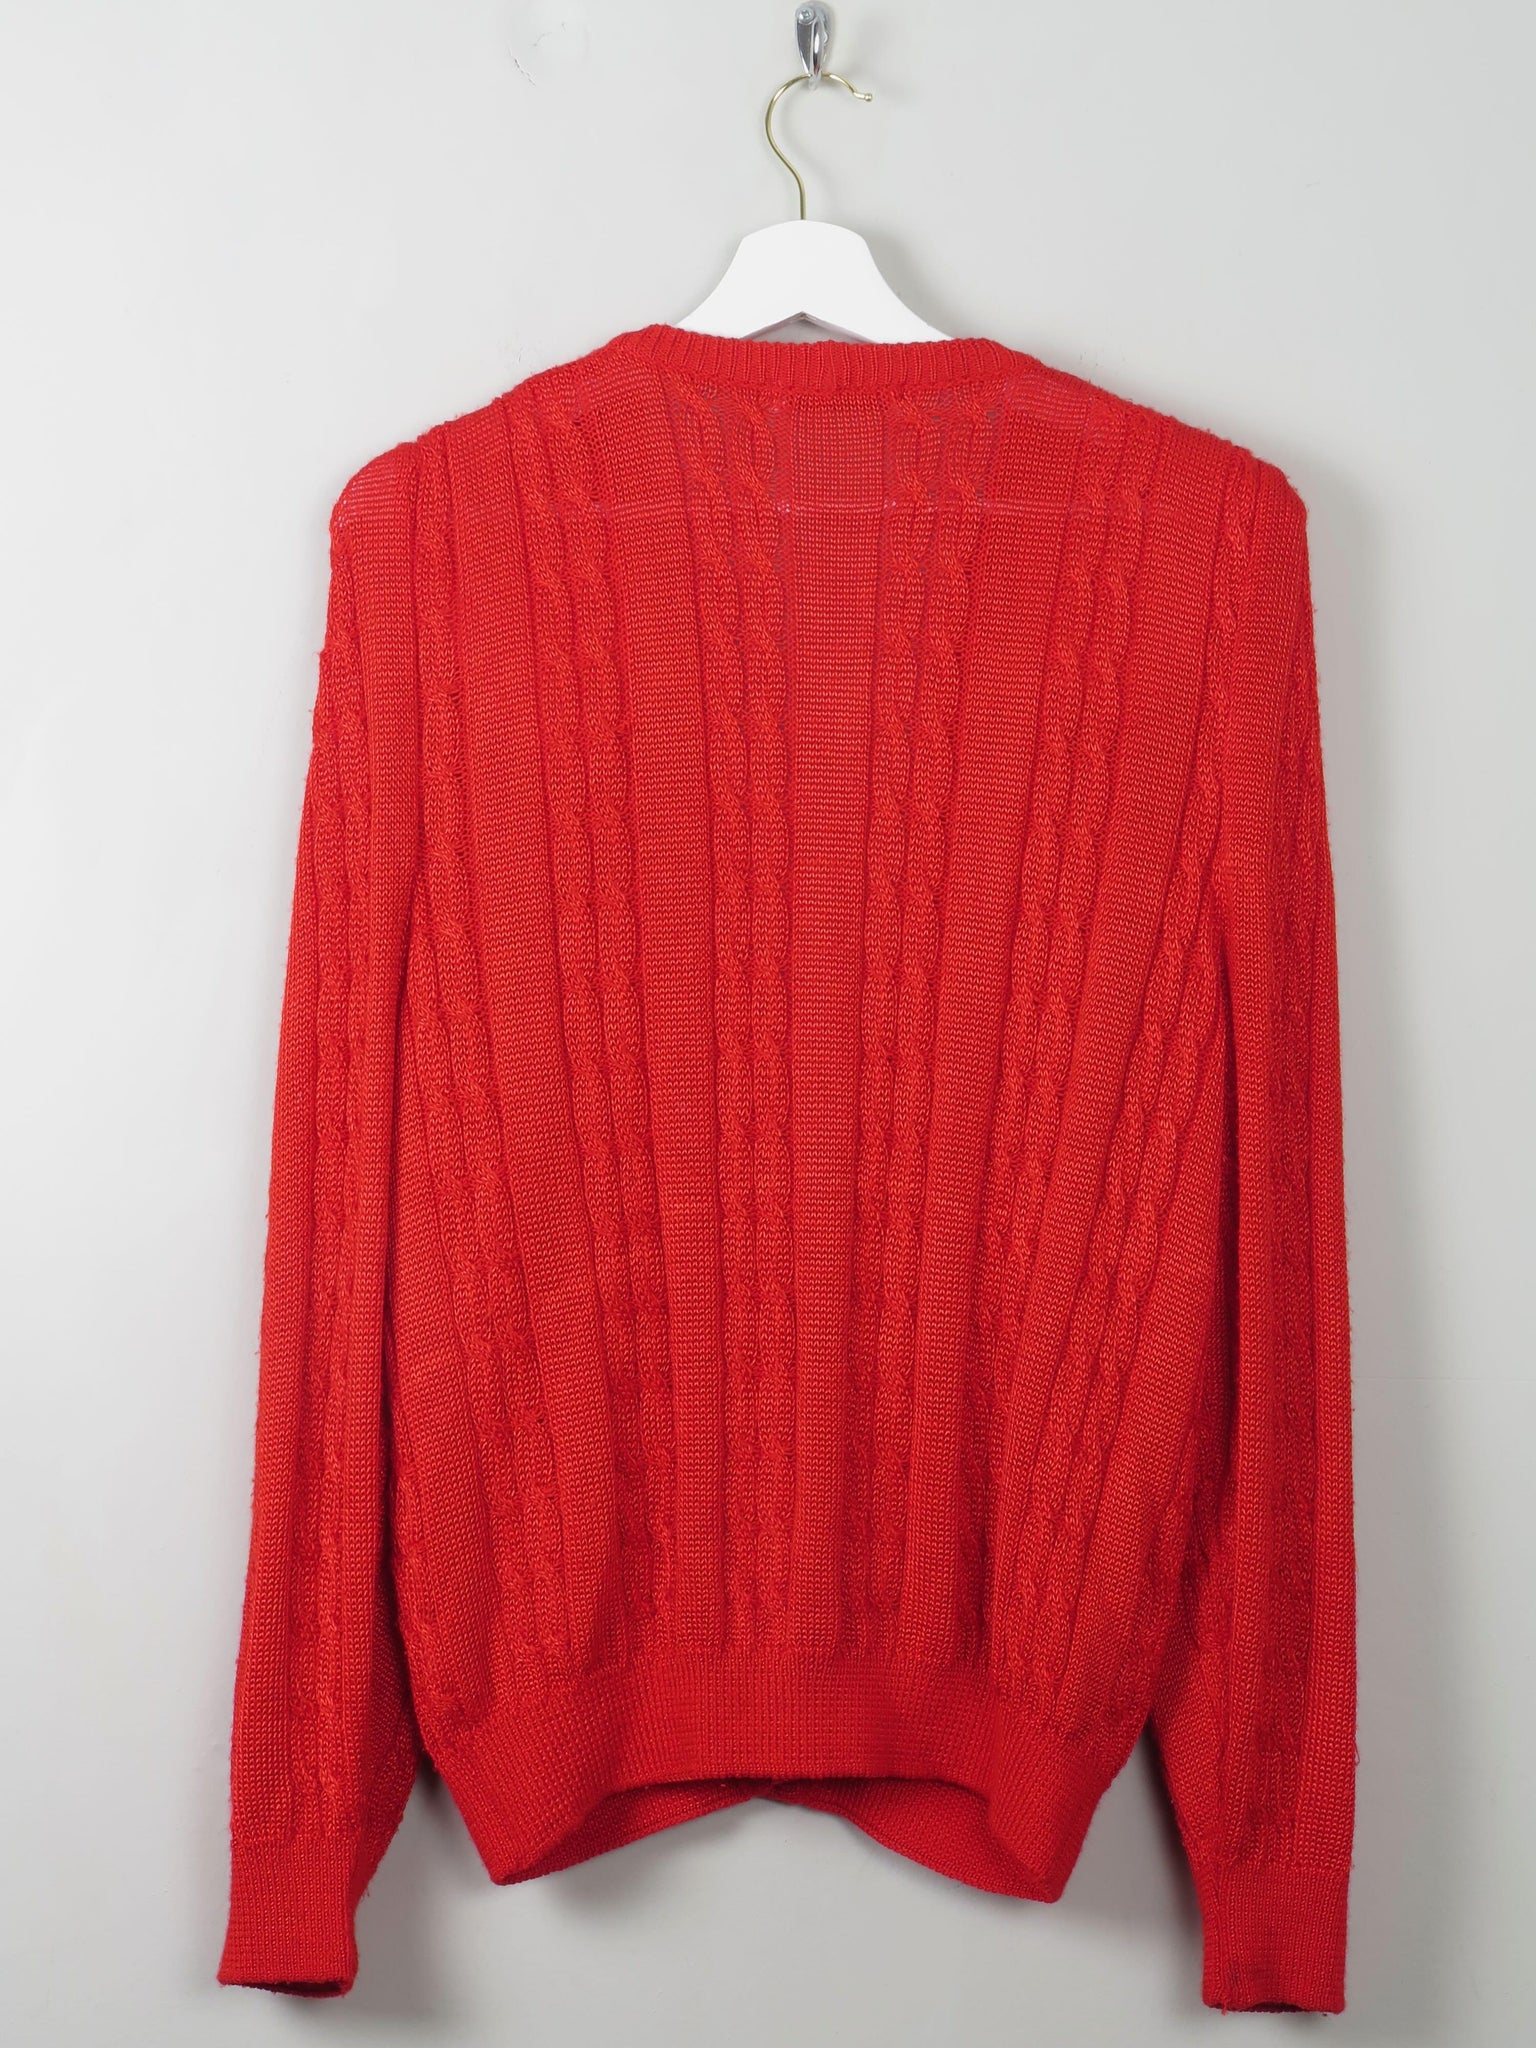 Women's Red Knitted VIntage Cardigan M/L - The Harlequin